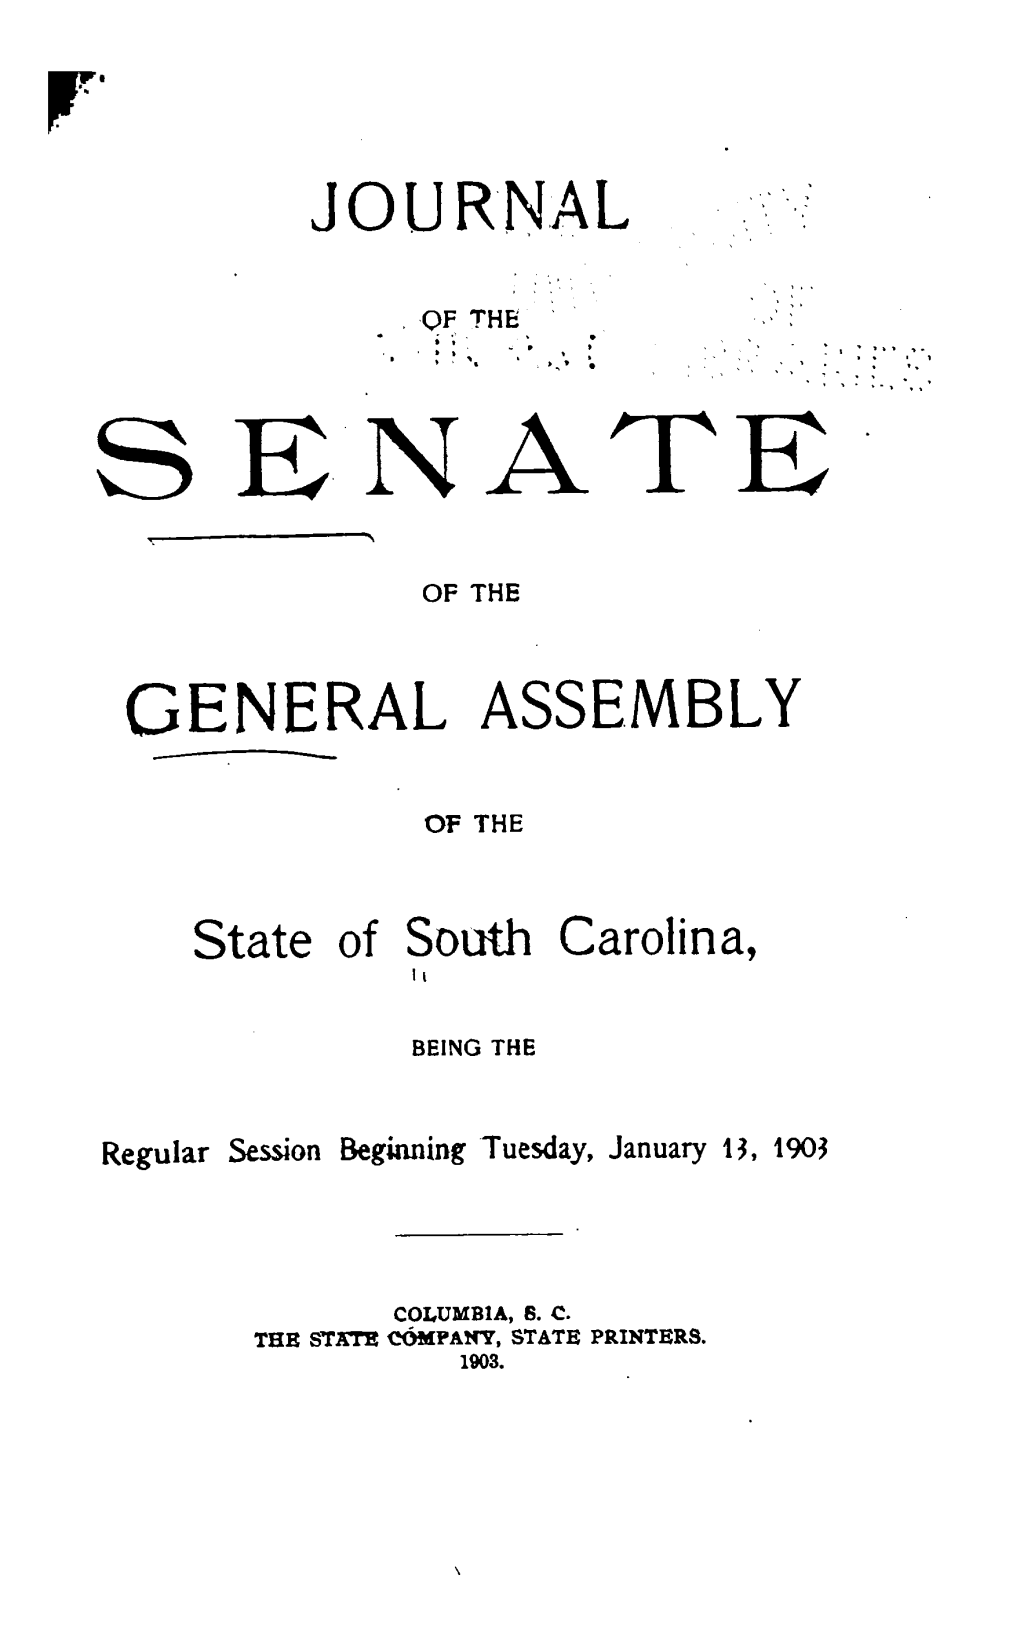 Journal of the Senate of the General Assembly of The